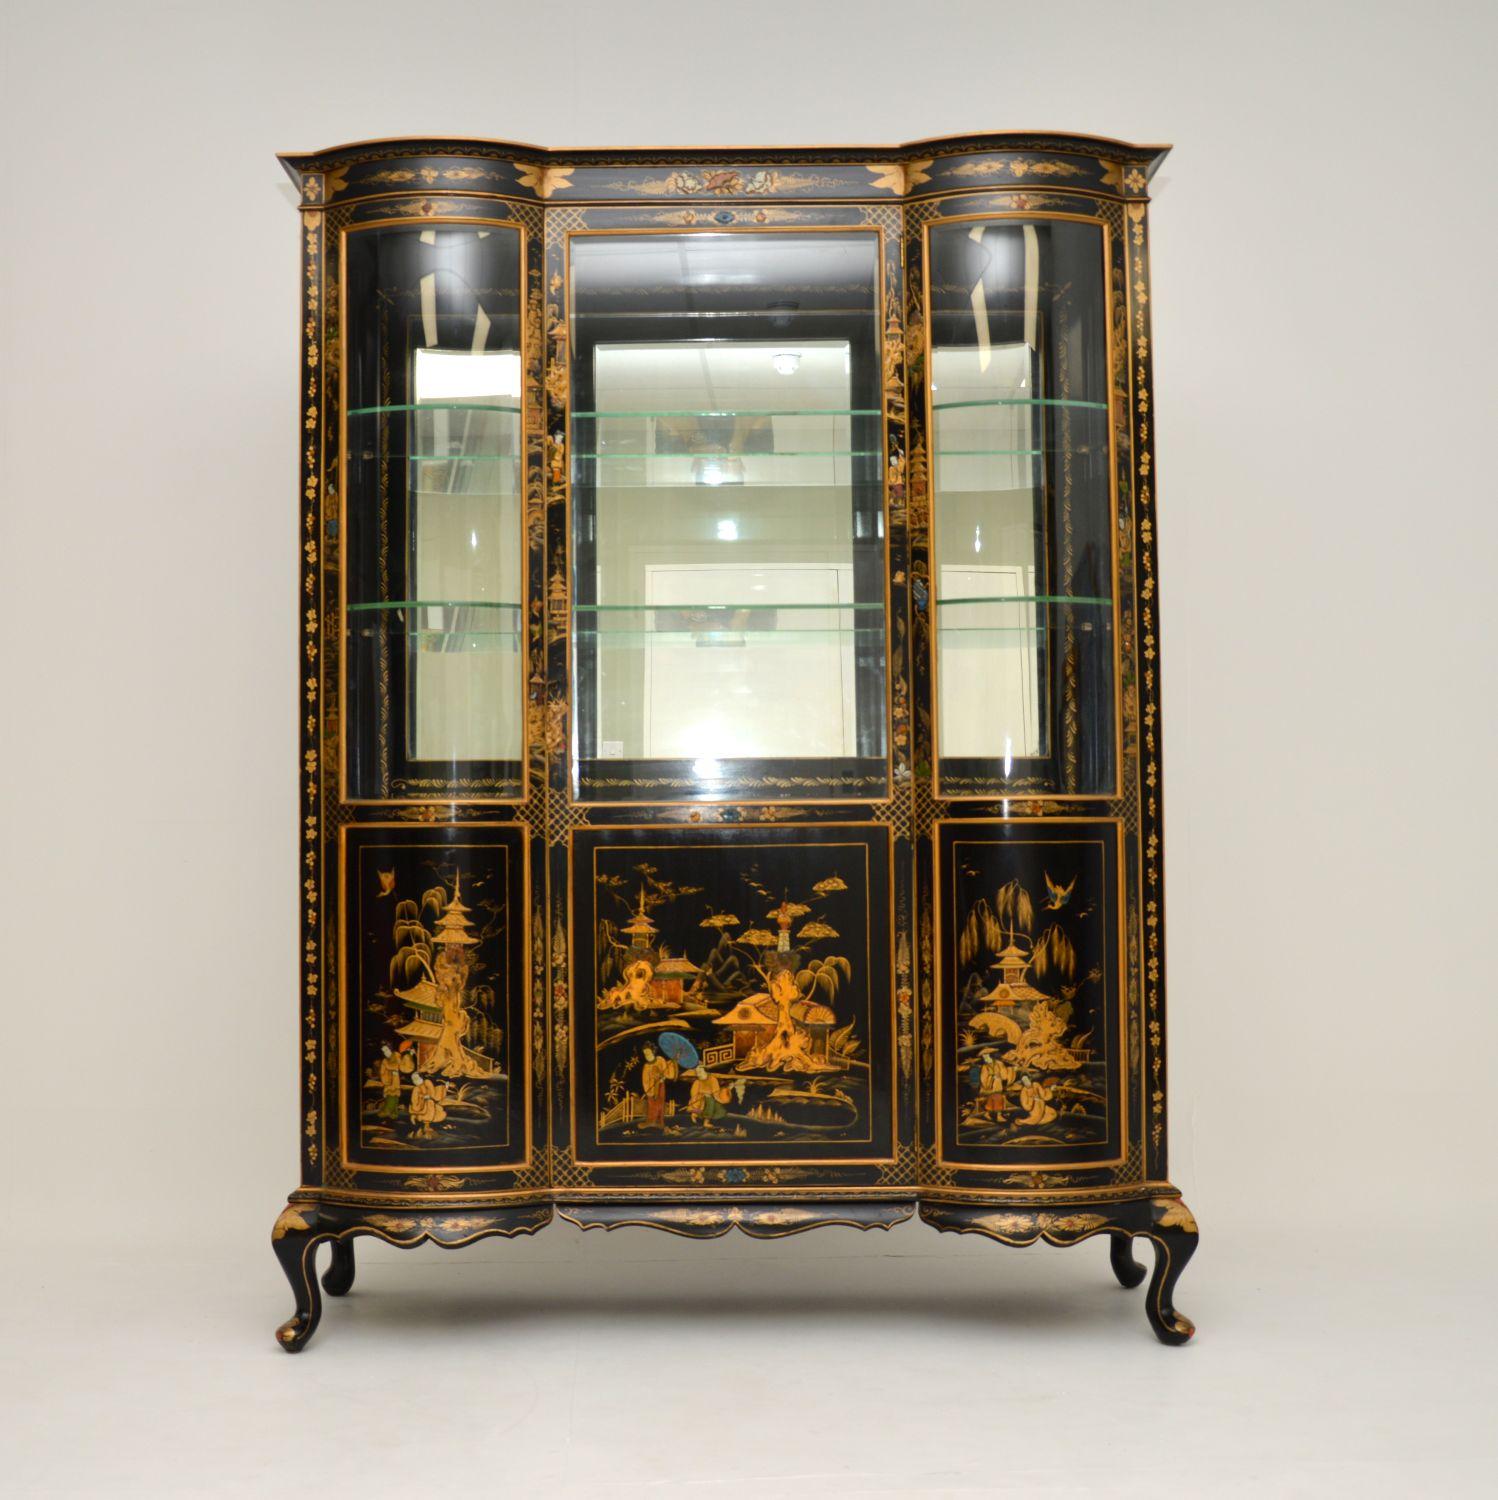 A magnificent antique chinoiserie cabinet of the highest quality. This was made in England & dates from the 1920’s.

This is one of the finest examples we have ever come across, it is extremely well made and is also extremely heavy! The lacquered